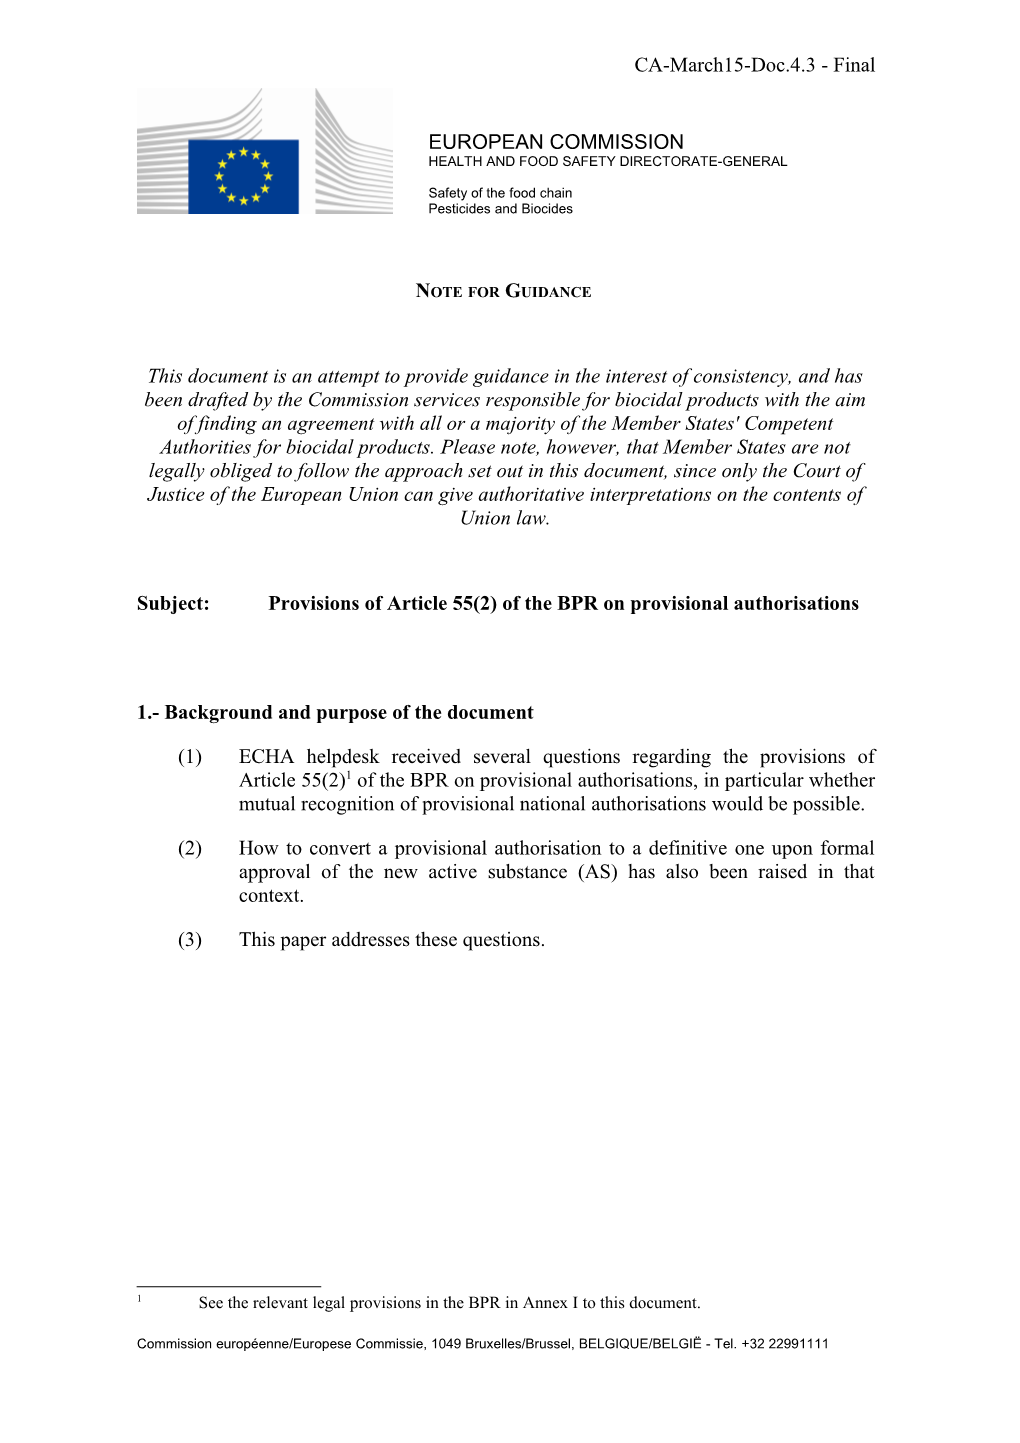 Subject:Provisions of Article 55(2) of the BPR on Provisional Authorisations